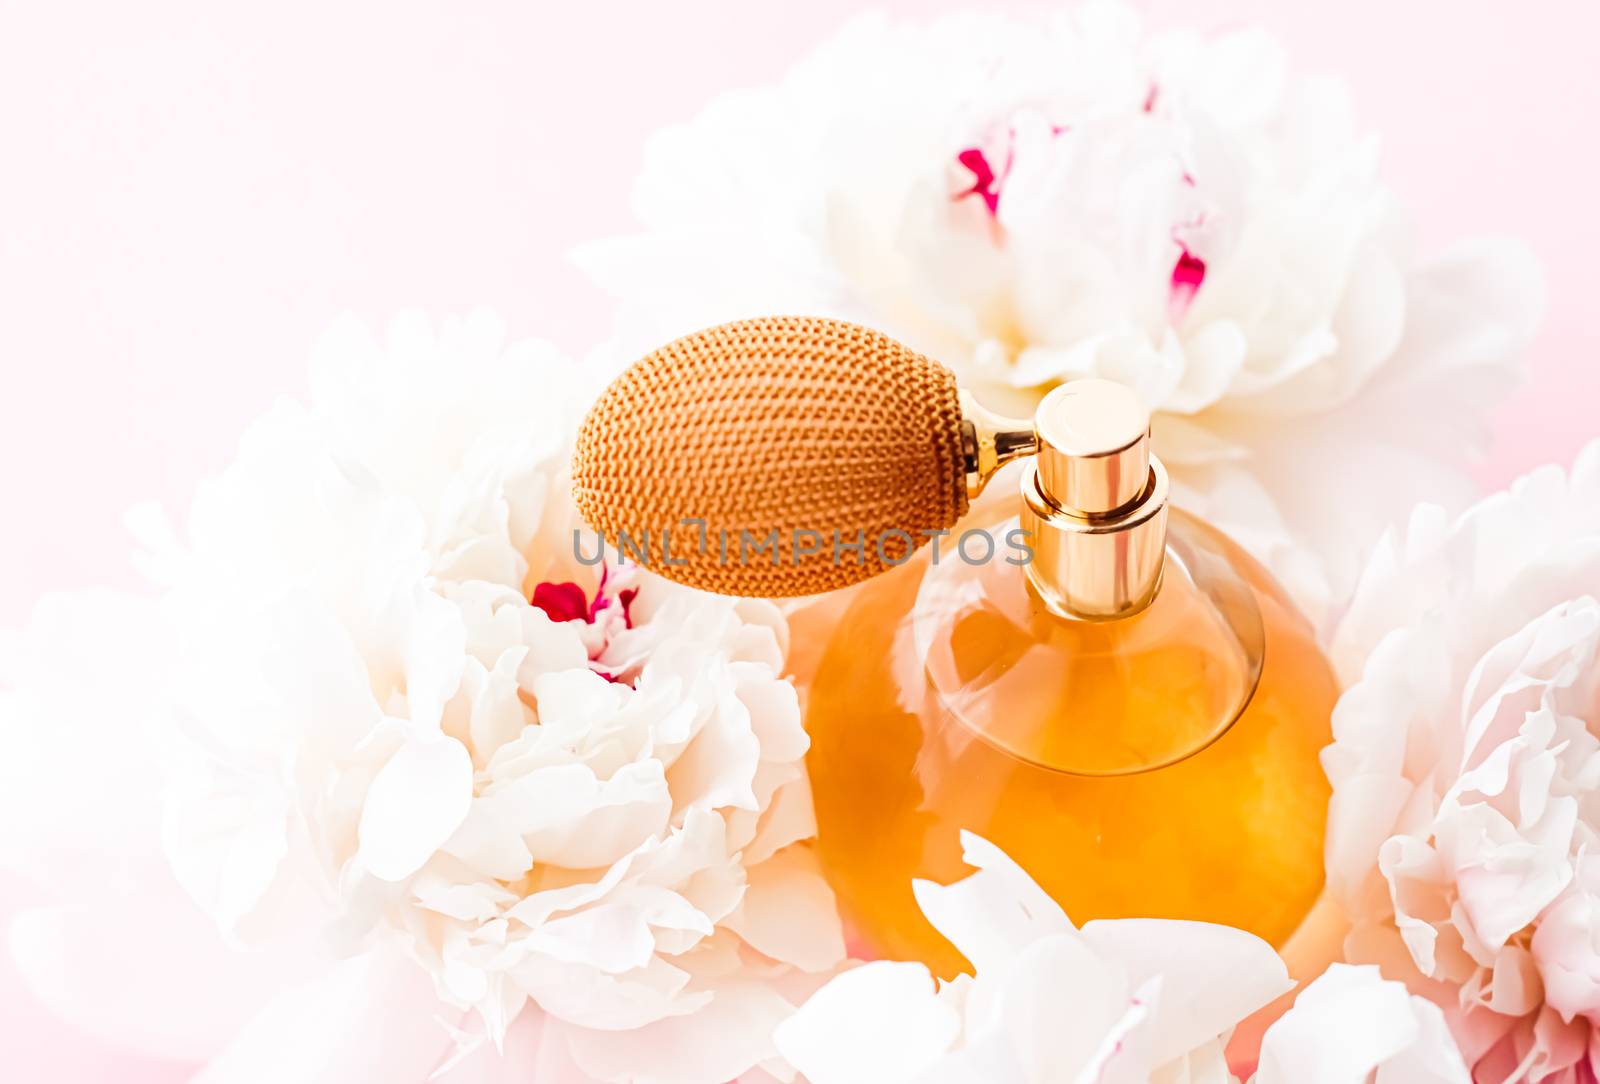 Chic fragrance bottle as citrus perfume product on background of peony flowers, parfum ad and beauty branding by Anneleven